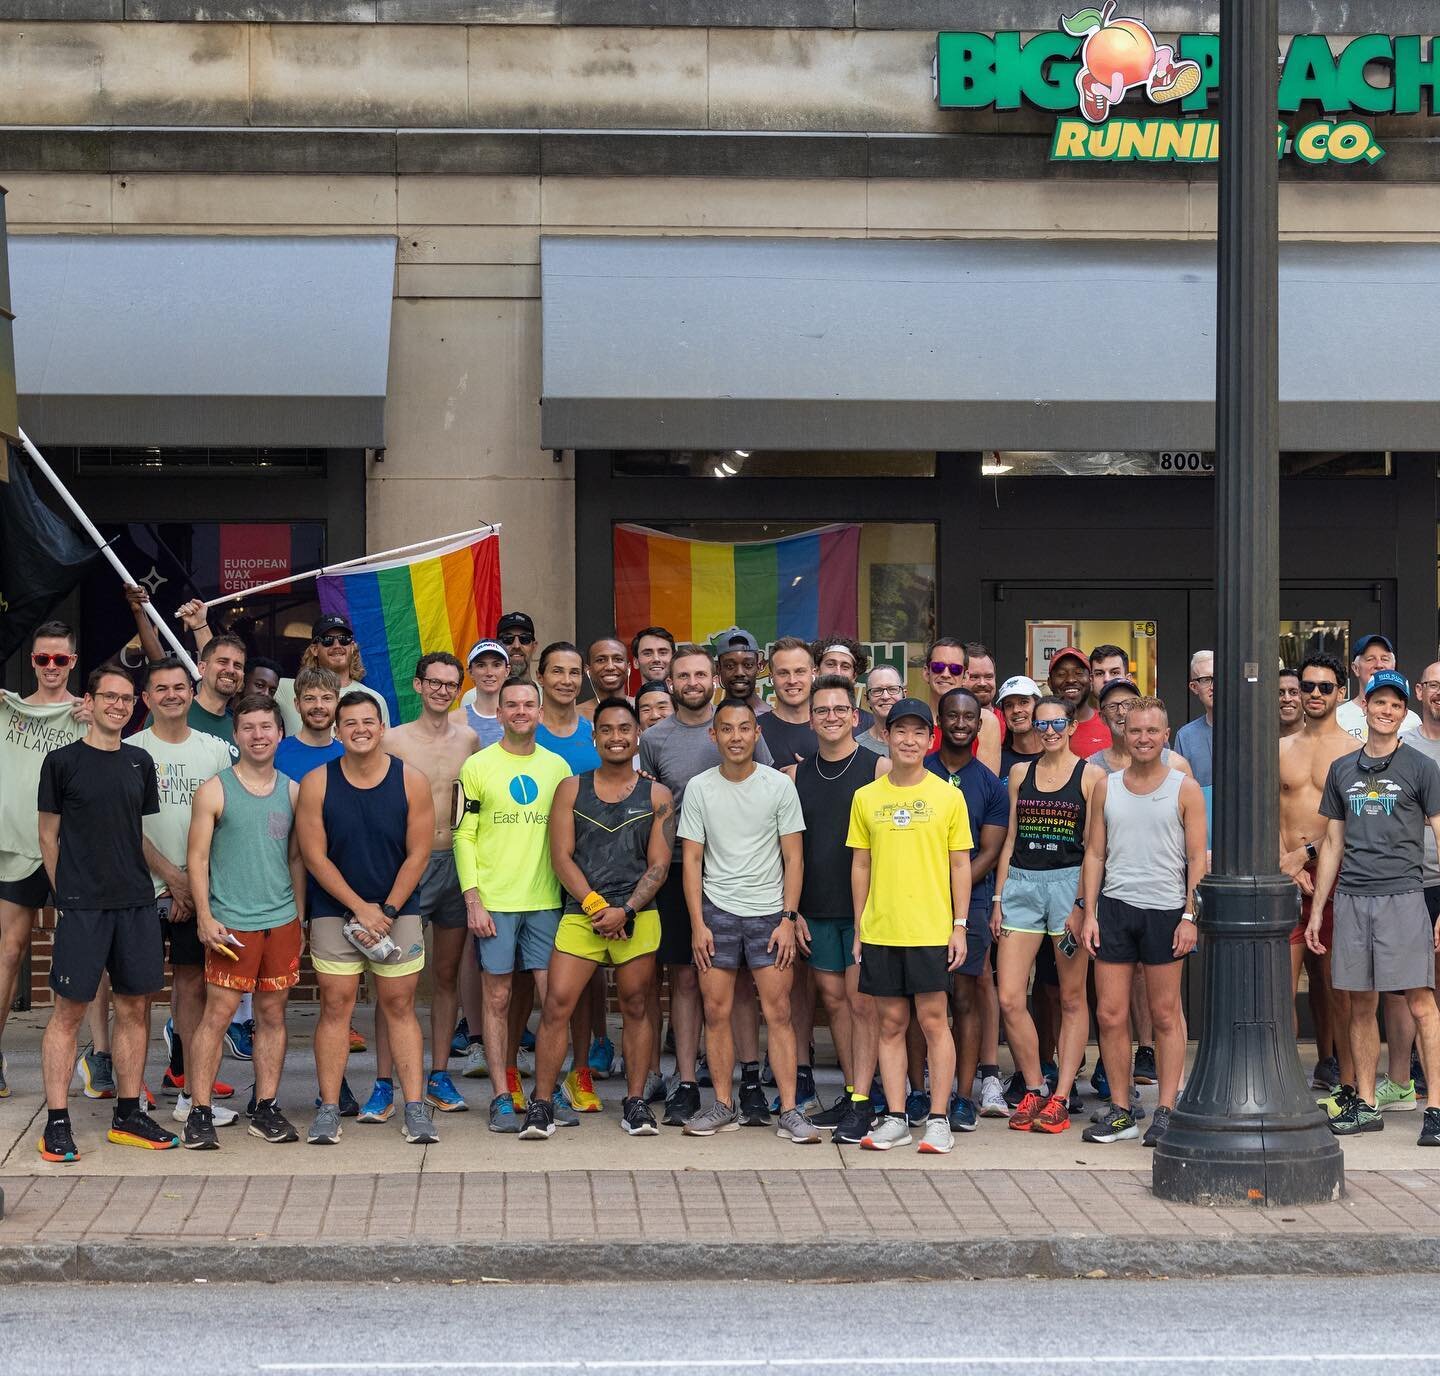 Thank you to everyone who joined us for the Pride Run Preview at @bigpeach_midtown store! 

We had fun running with you all, even if the light pole tried to steal our group photo spotlight. 🌈😜 

Atlanta Pride Run powered by @lululemon is only a few